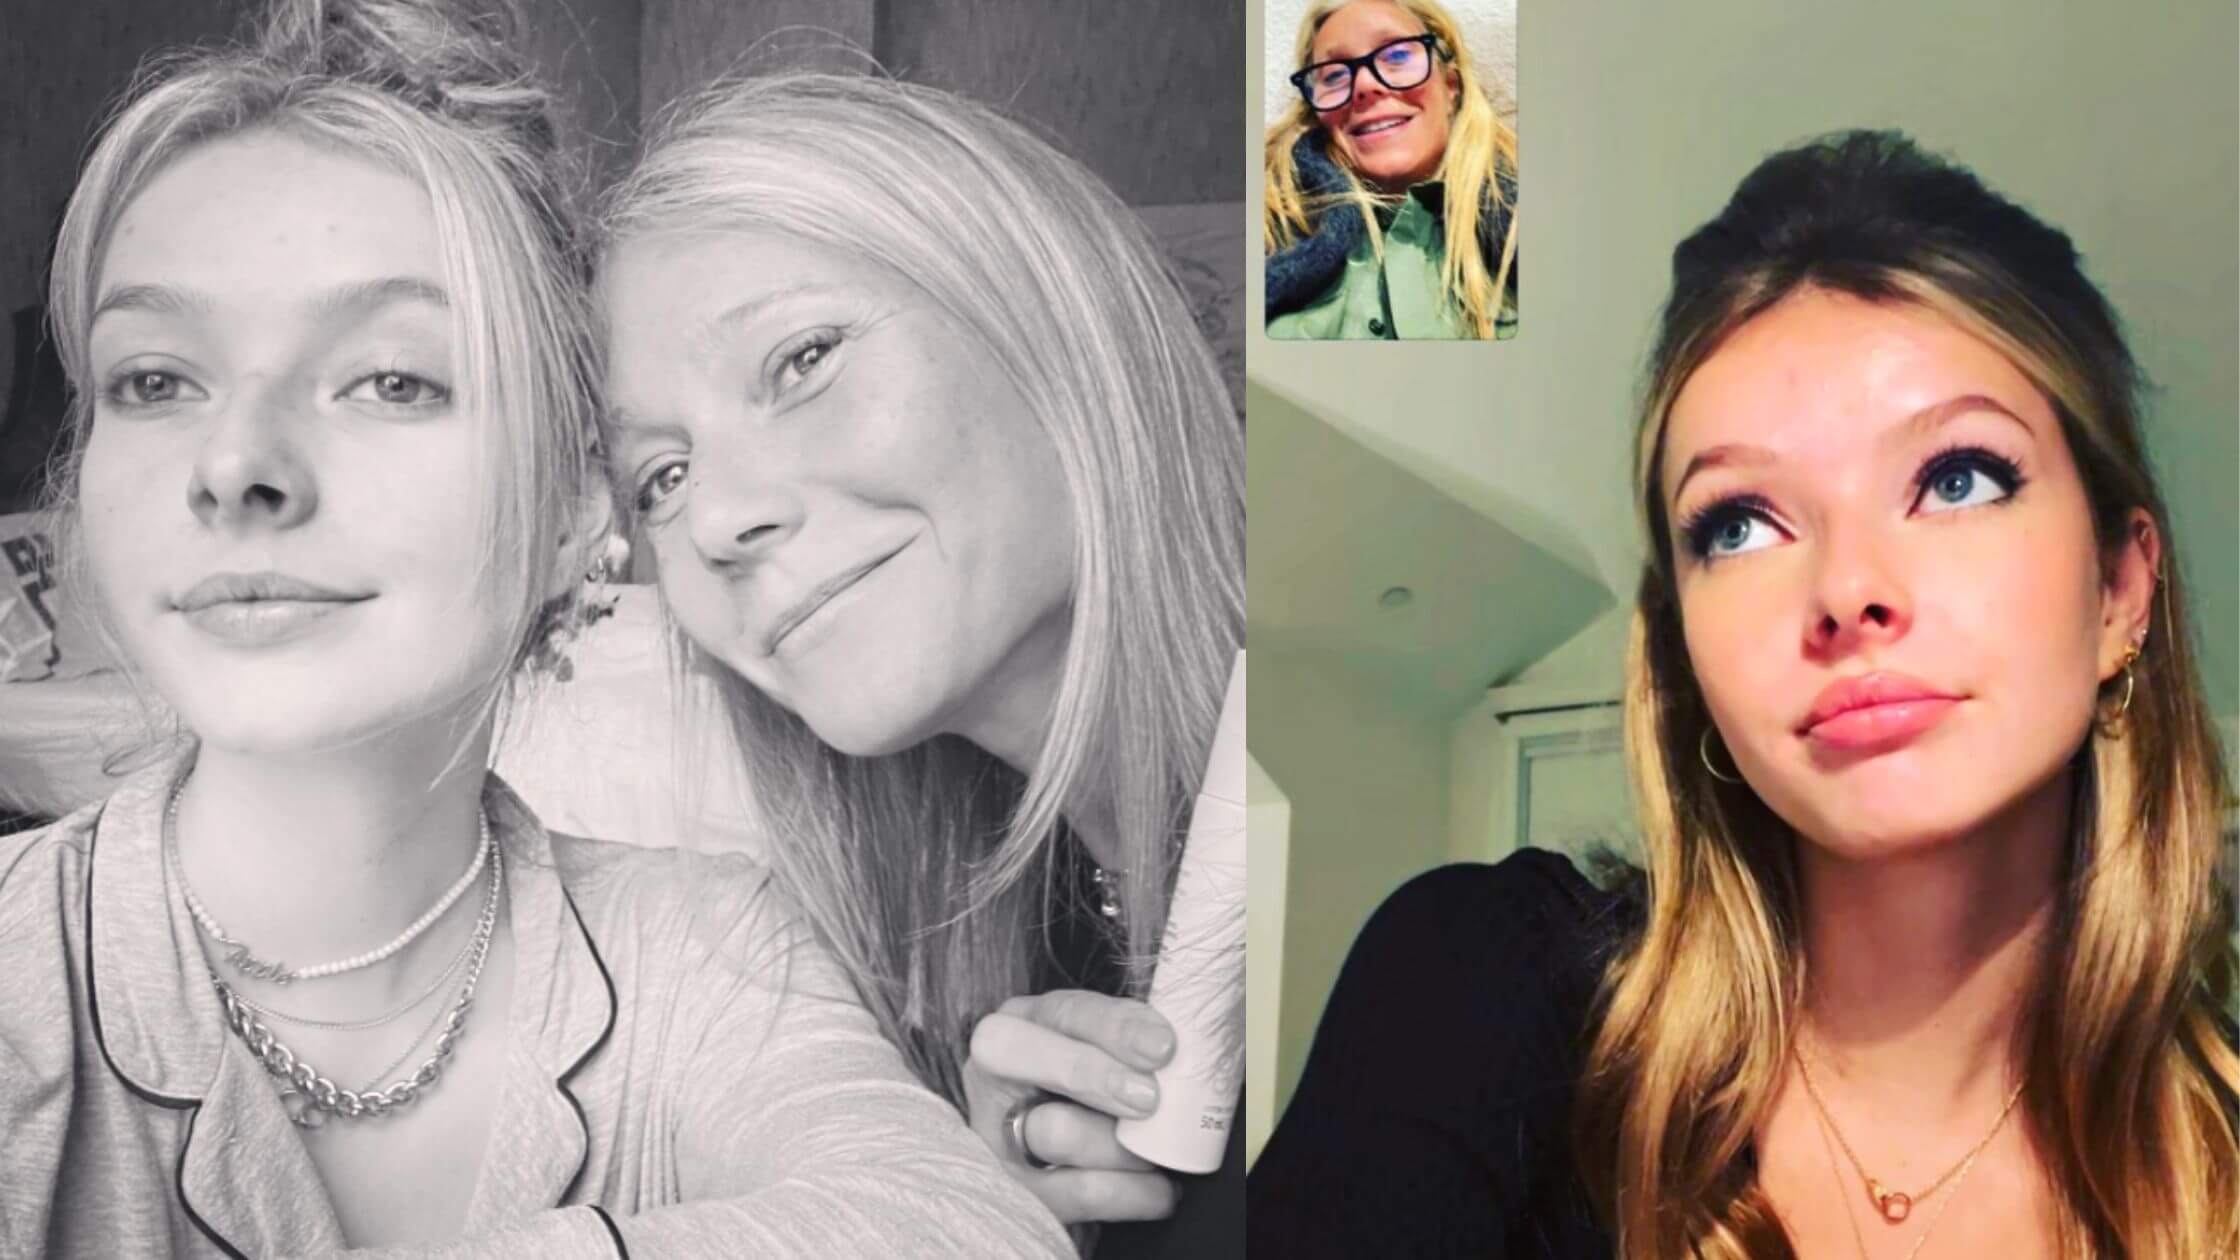 Gwyneth Paltrow’s Daughter Apple Martin Bio, Age, Family, Relationships, Net Worth And More